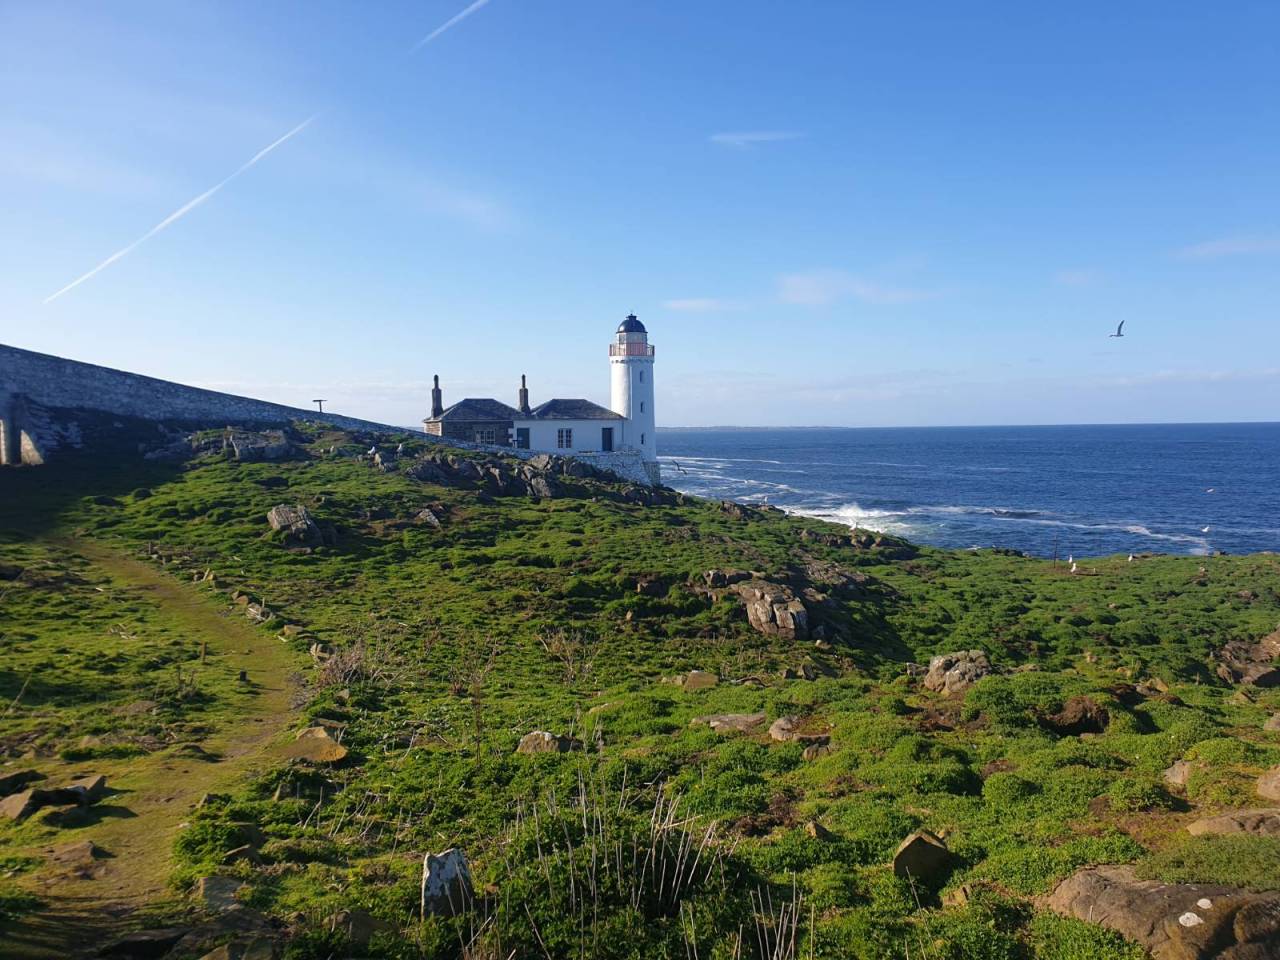 Photograph of a lighthouse on the green shores of an island.